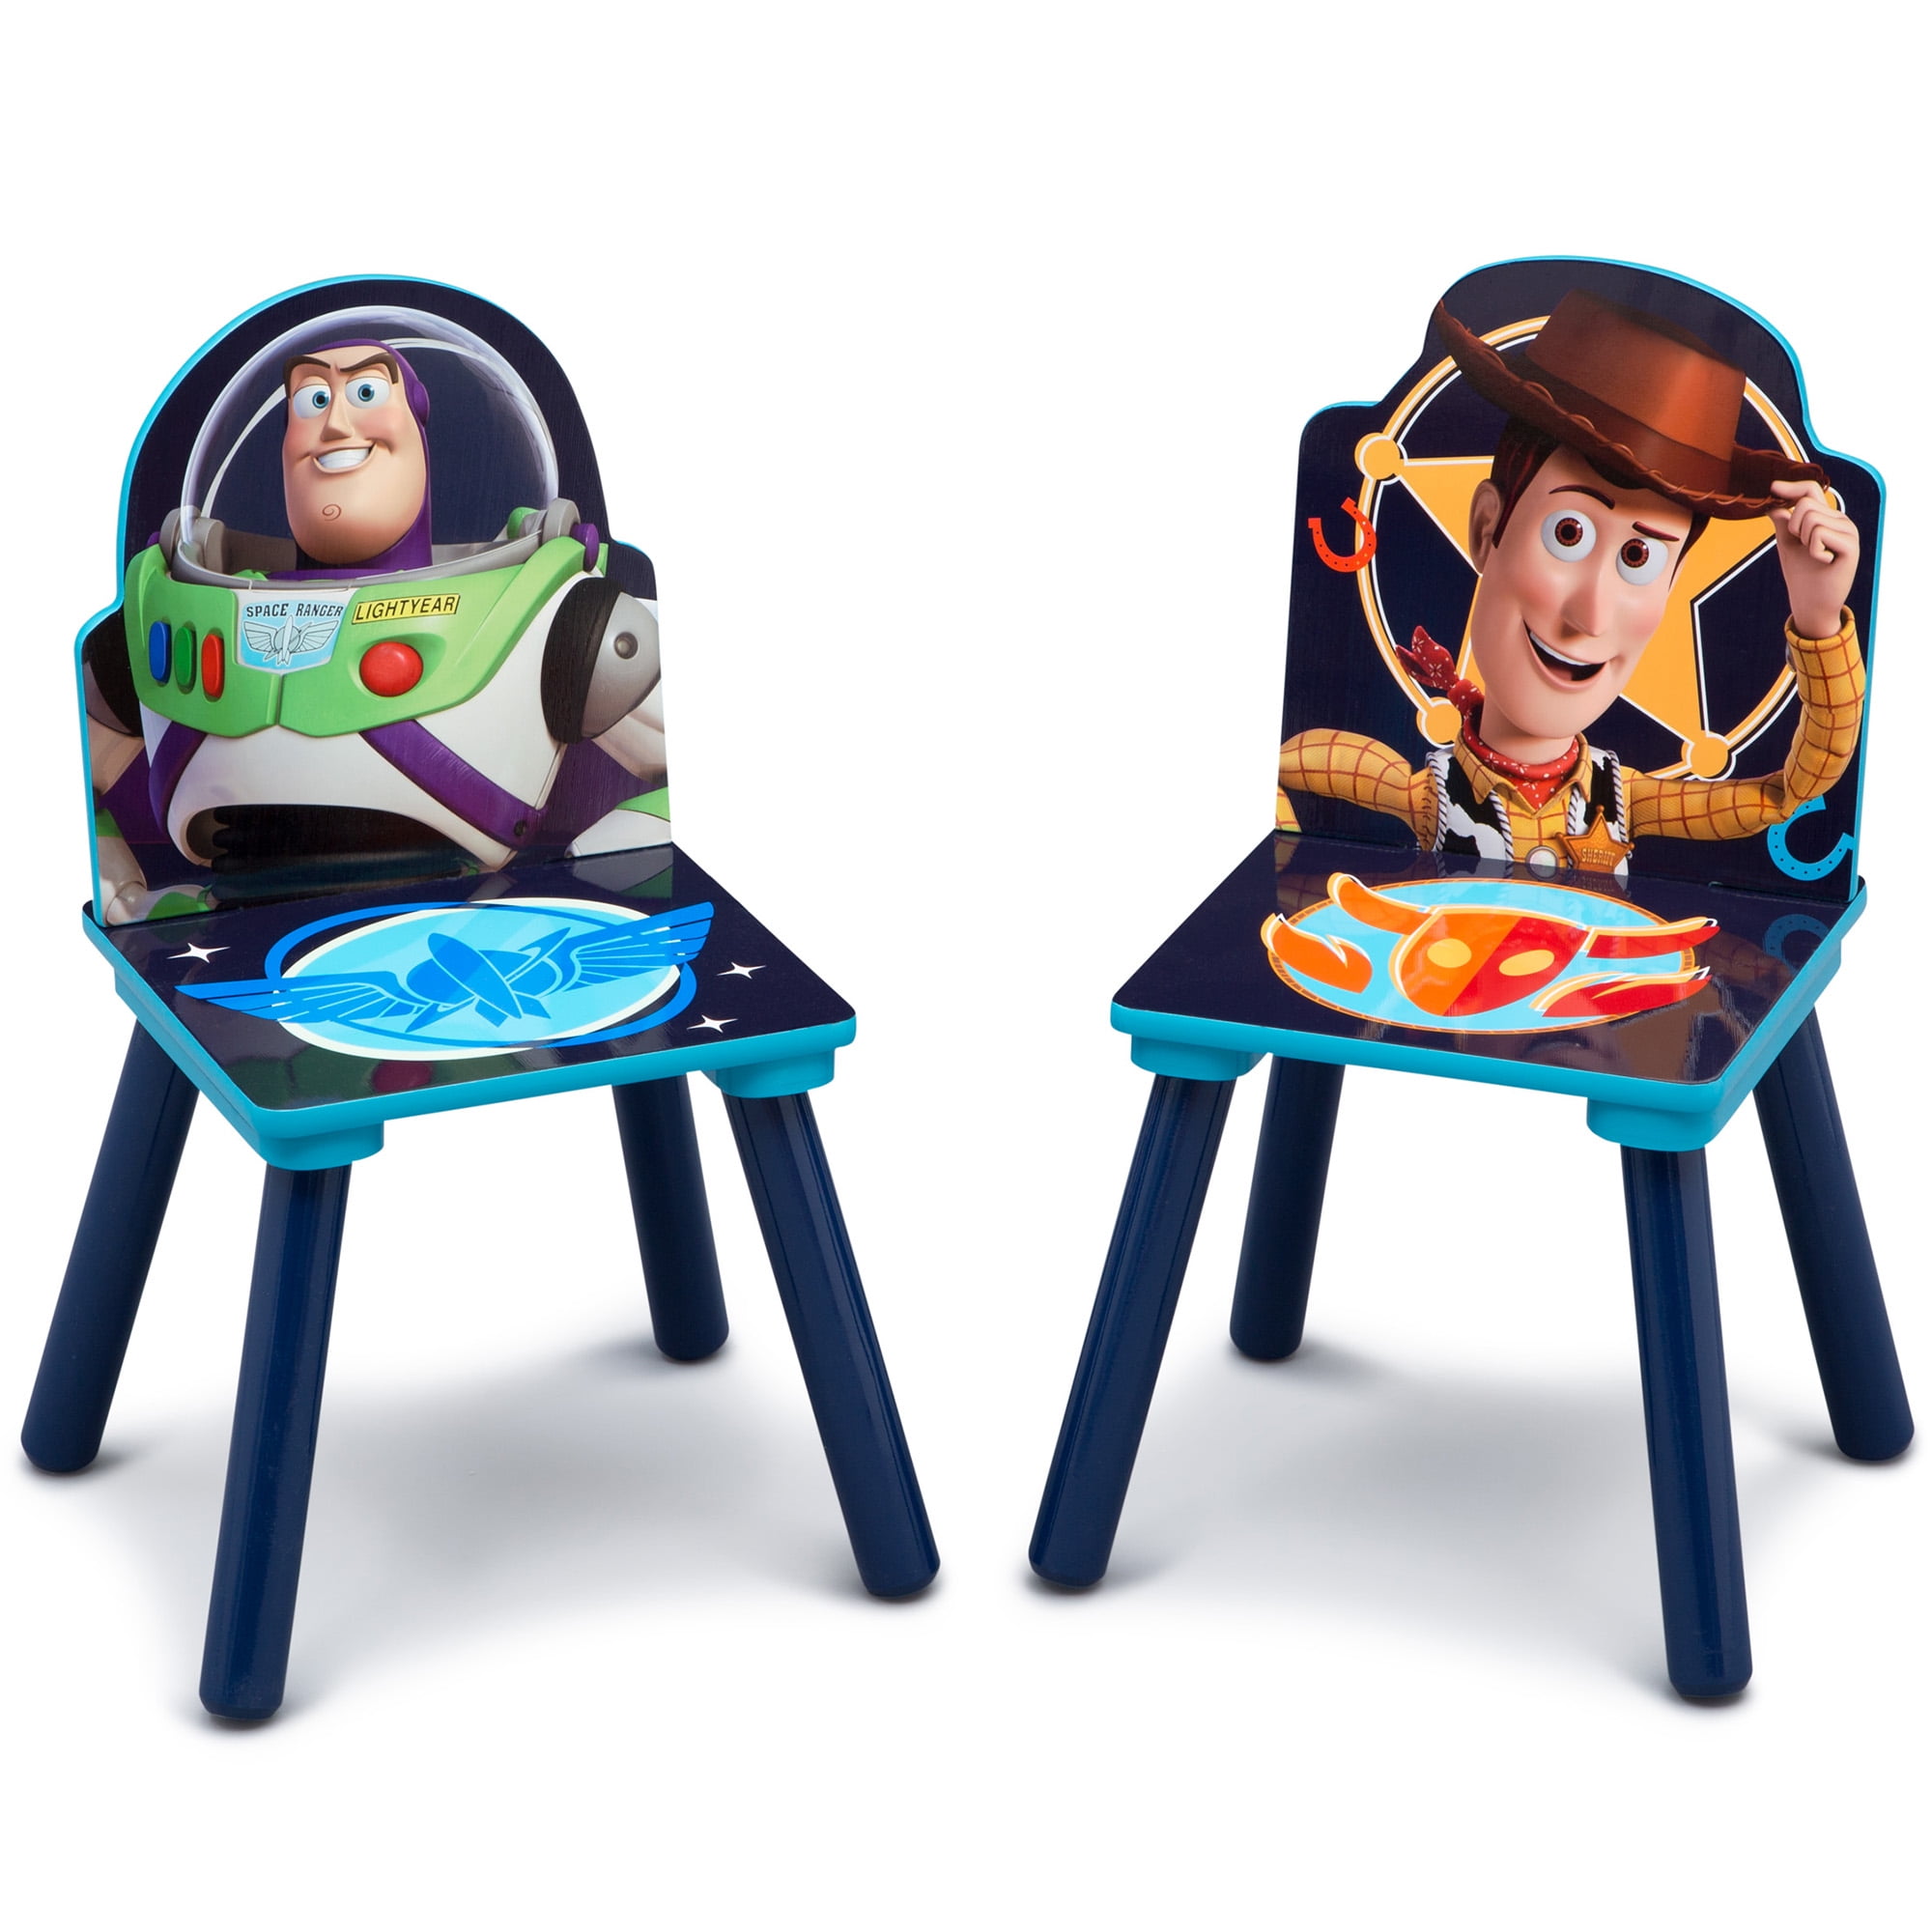 Disney/Pixar Toy Story 4 Kids Table and Chair Set with Storage by 